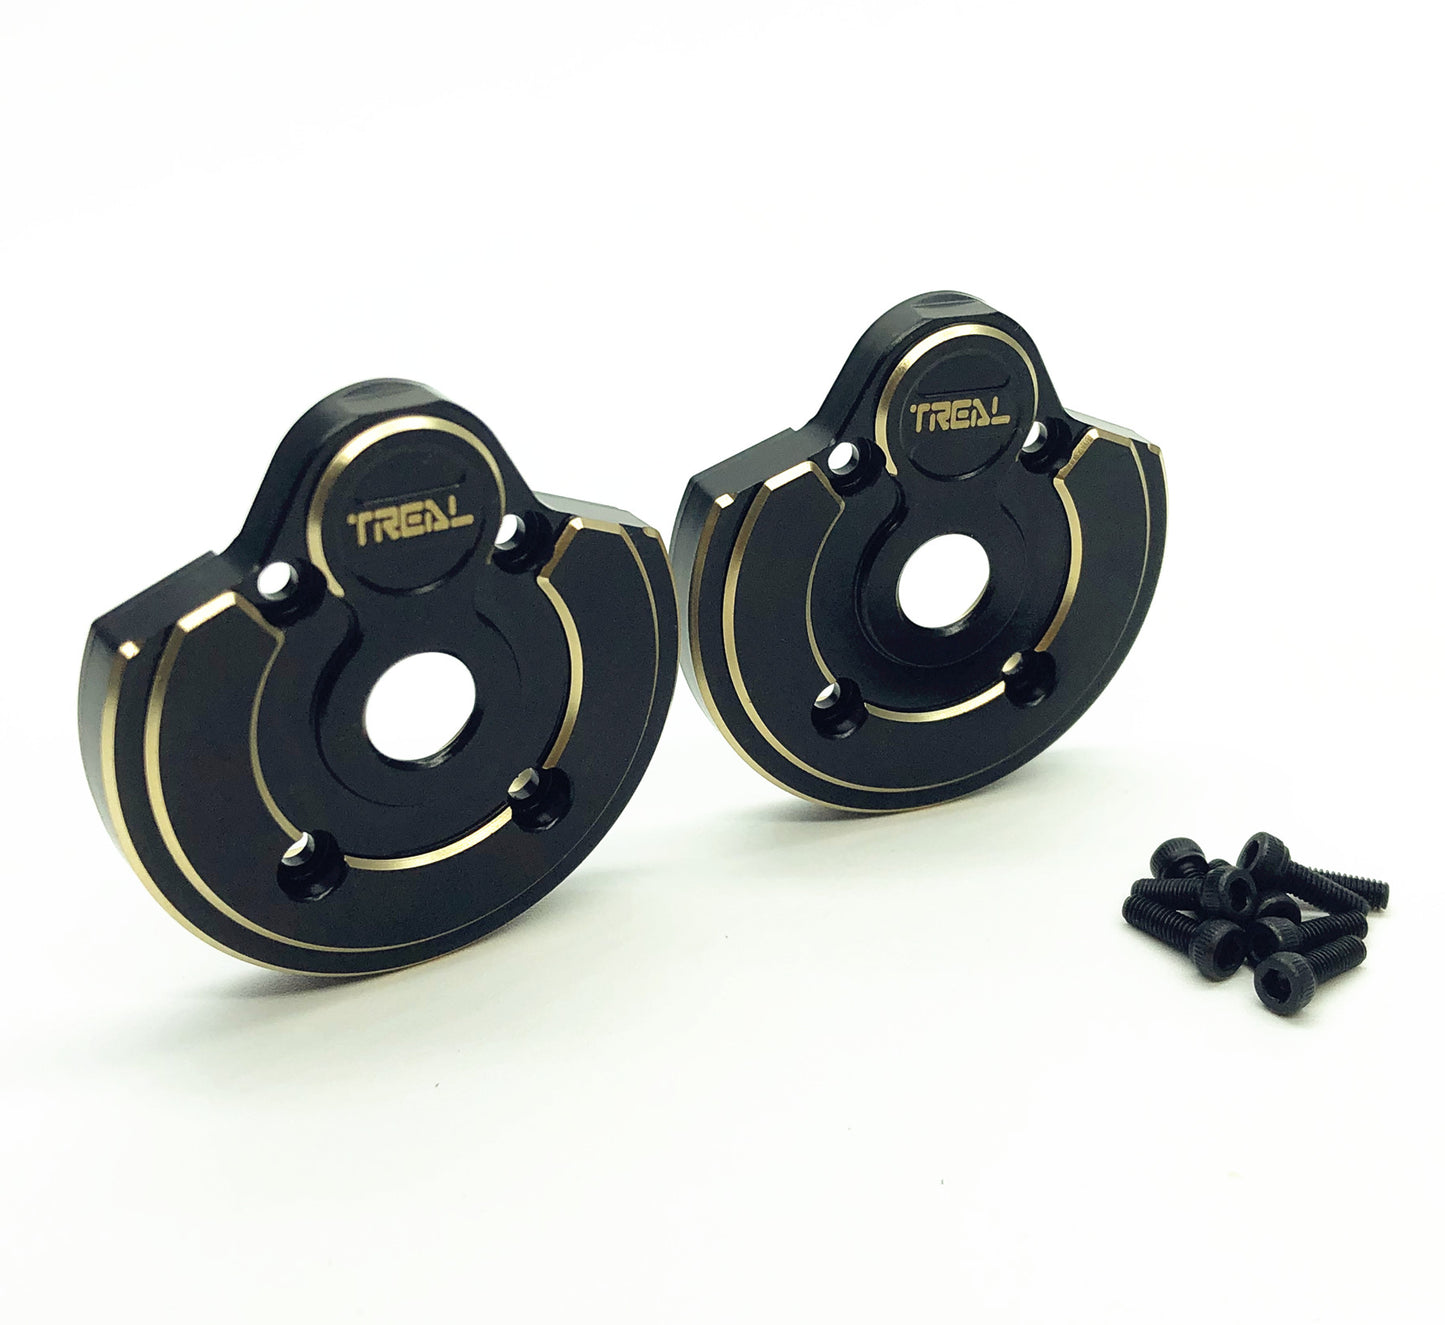 Treal Brass Outer Portal Covers Weights 52g for Axial Capra UTB/SCX10 III -Type A